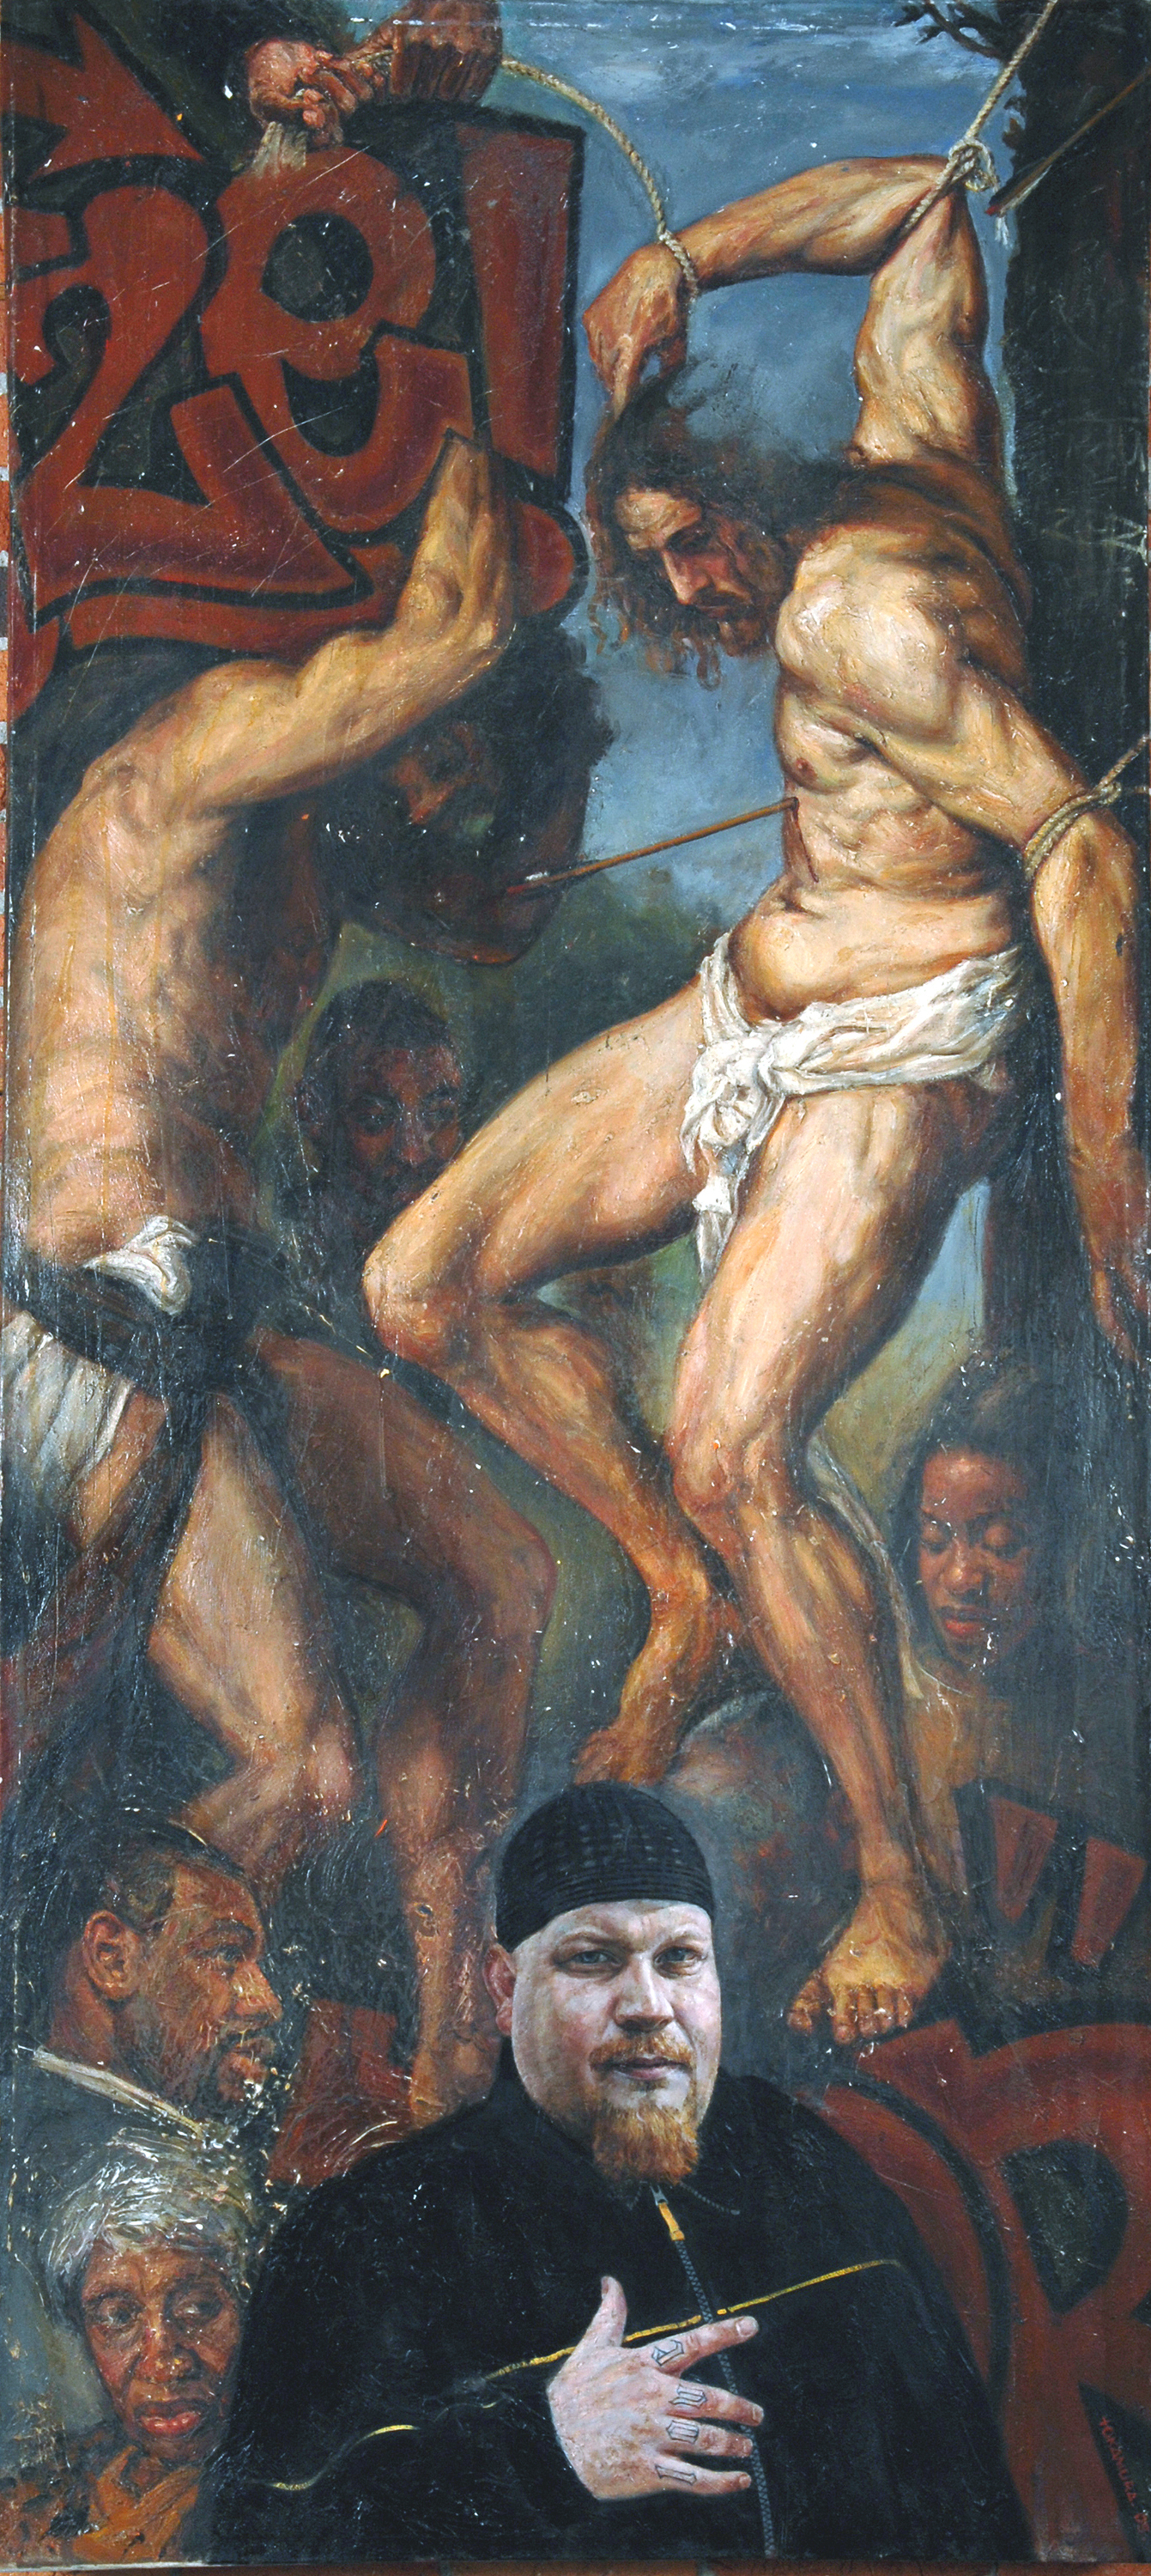 Image of Religion, oil on canvas, 82.5 x 37.5